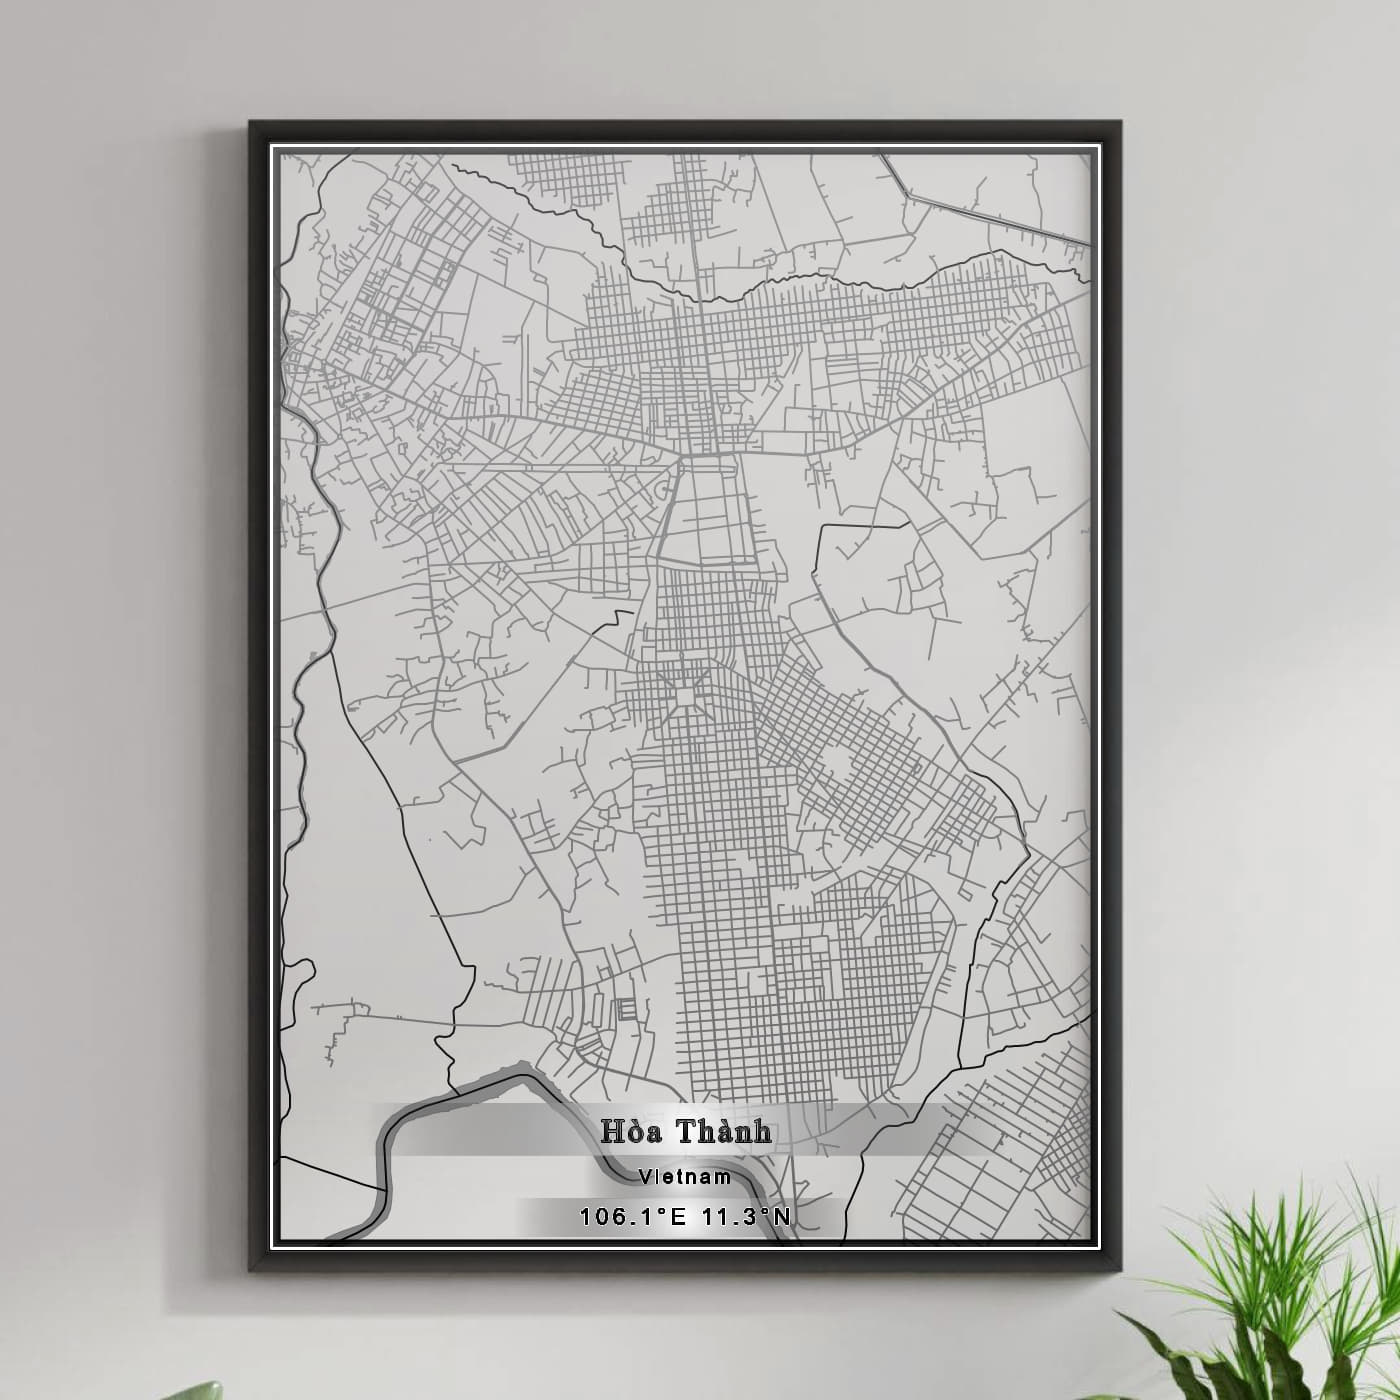 ROAD MAP OF HOA THANH, VIETNAM BY MAPBAKES